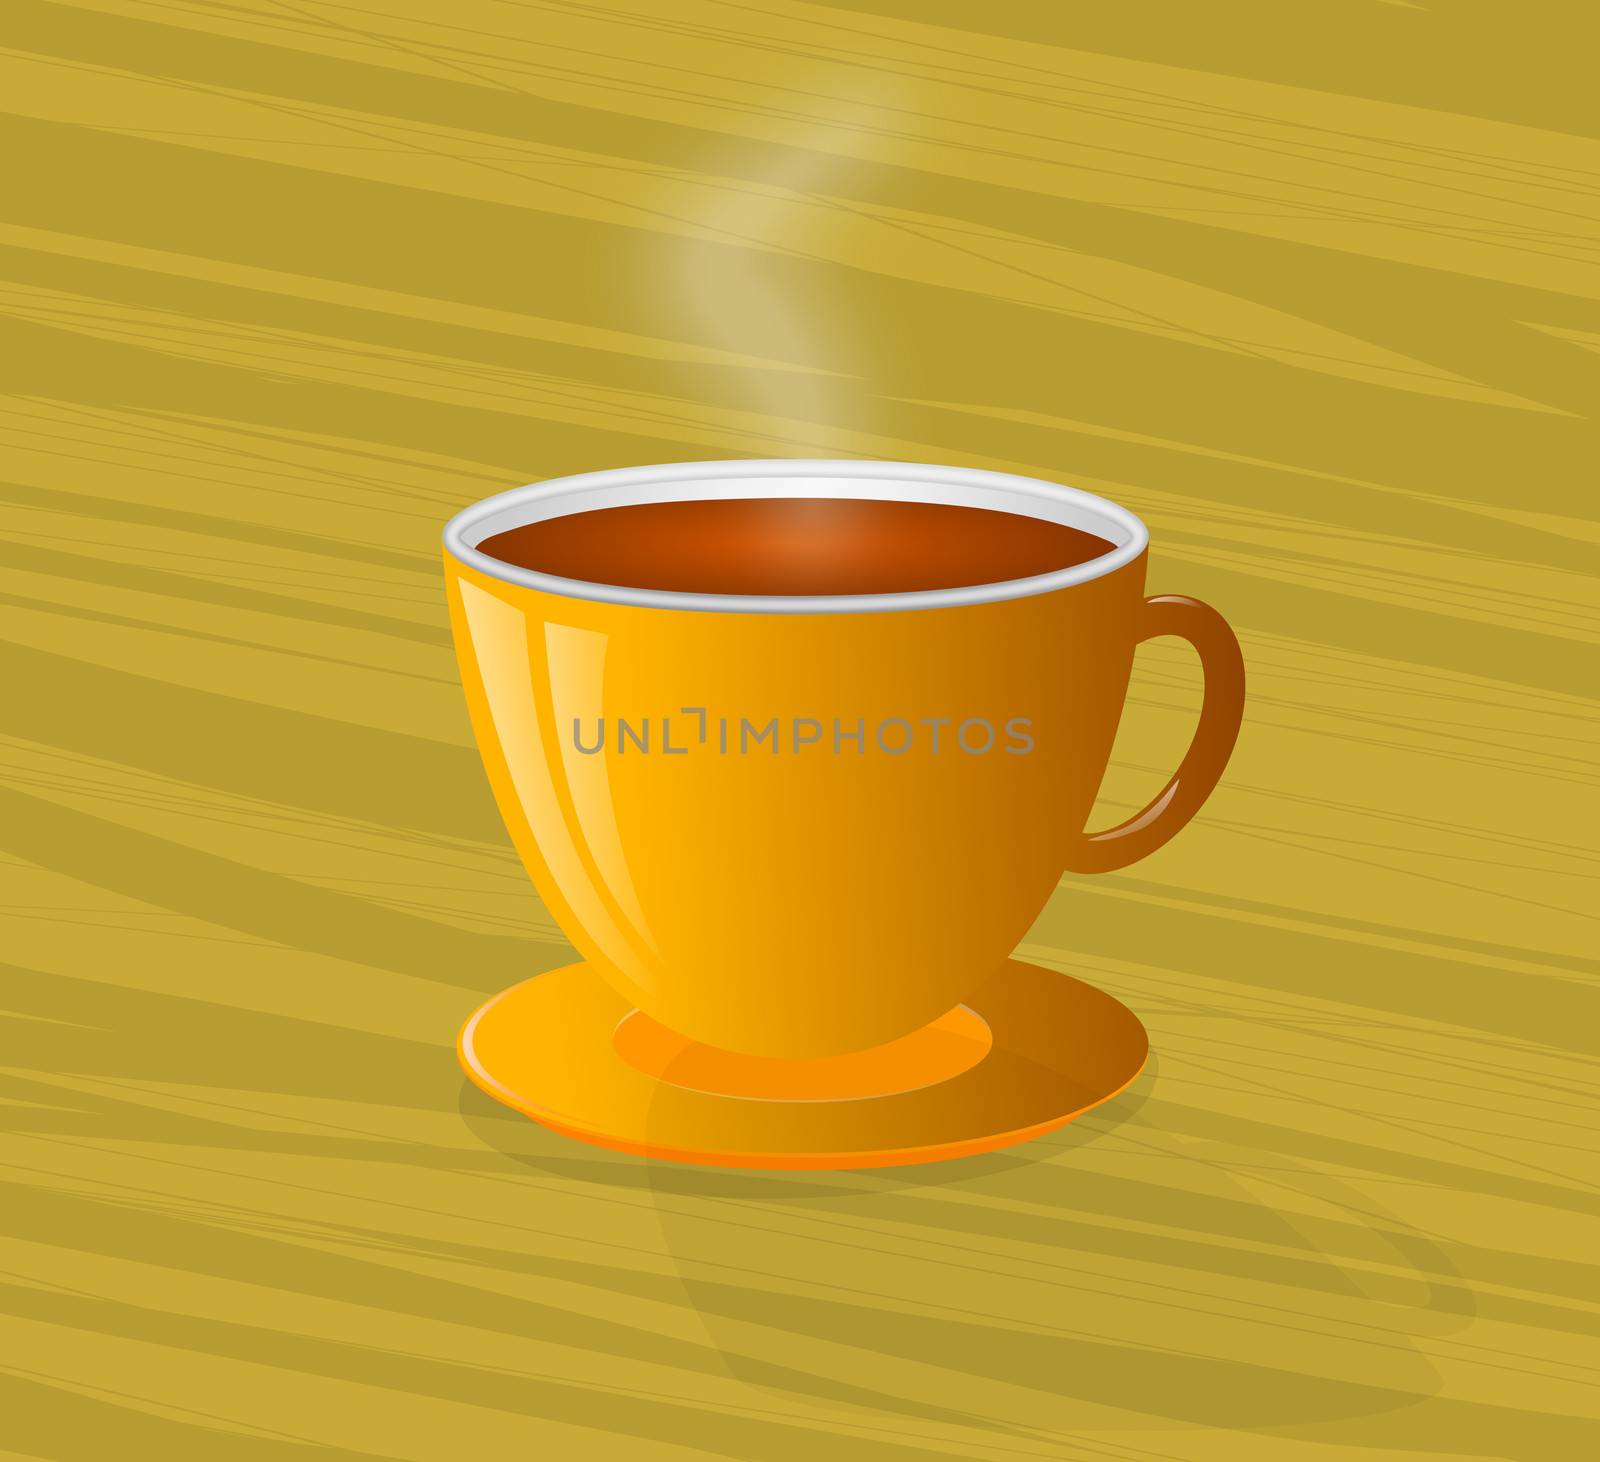 Illustration of steaming hot coffee in a yellow cup and saucer on a wooden background
